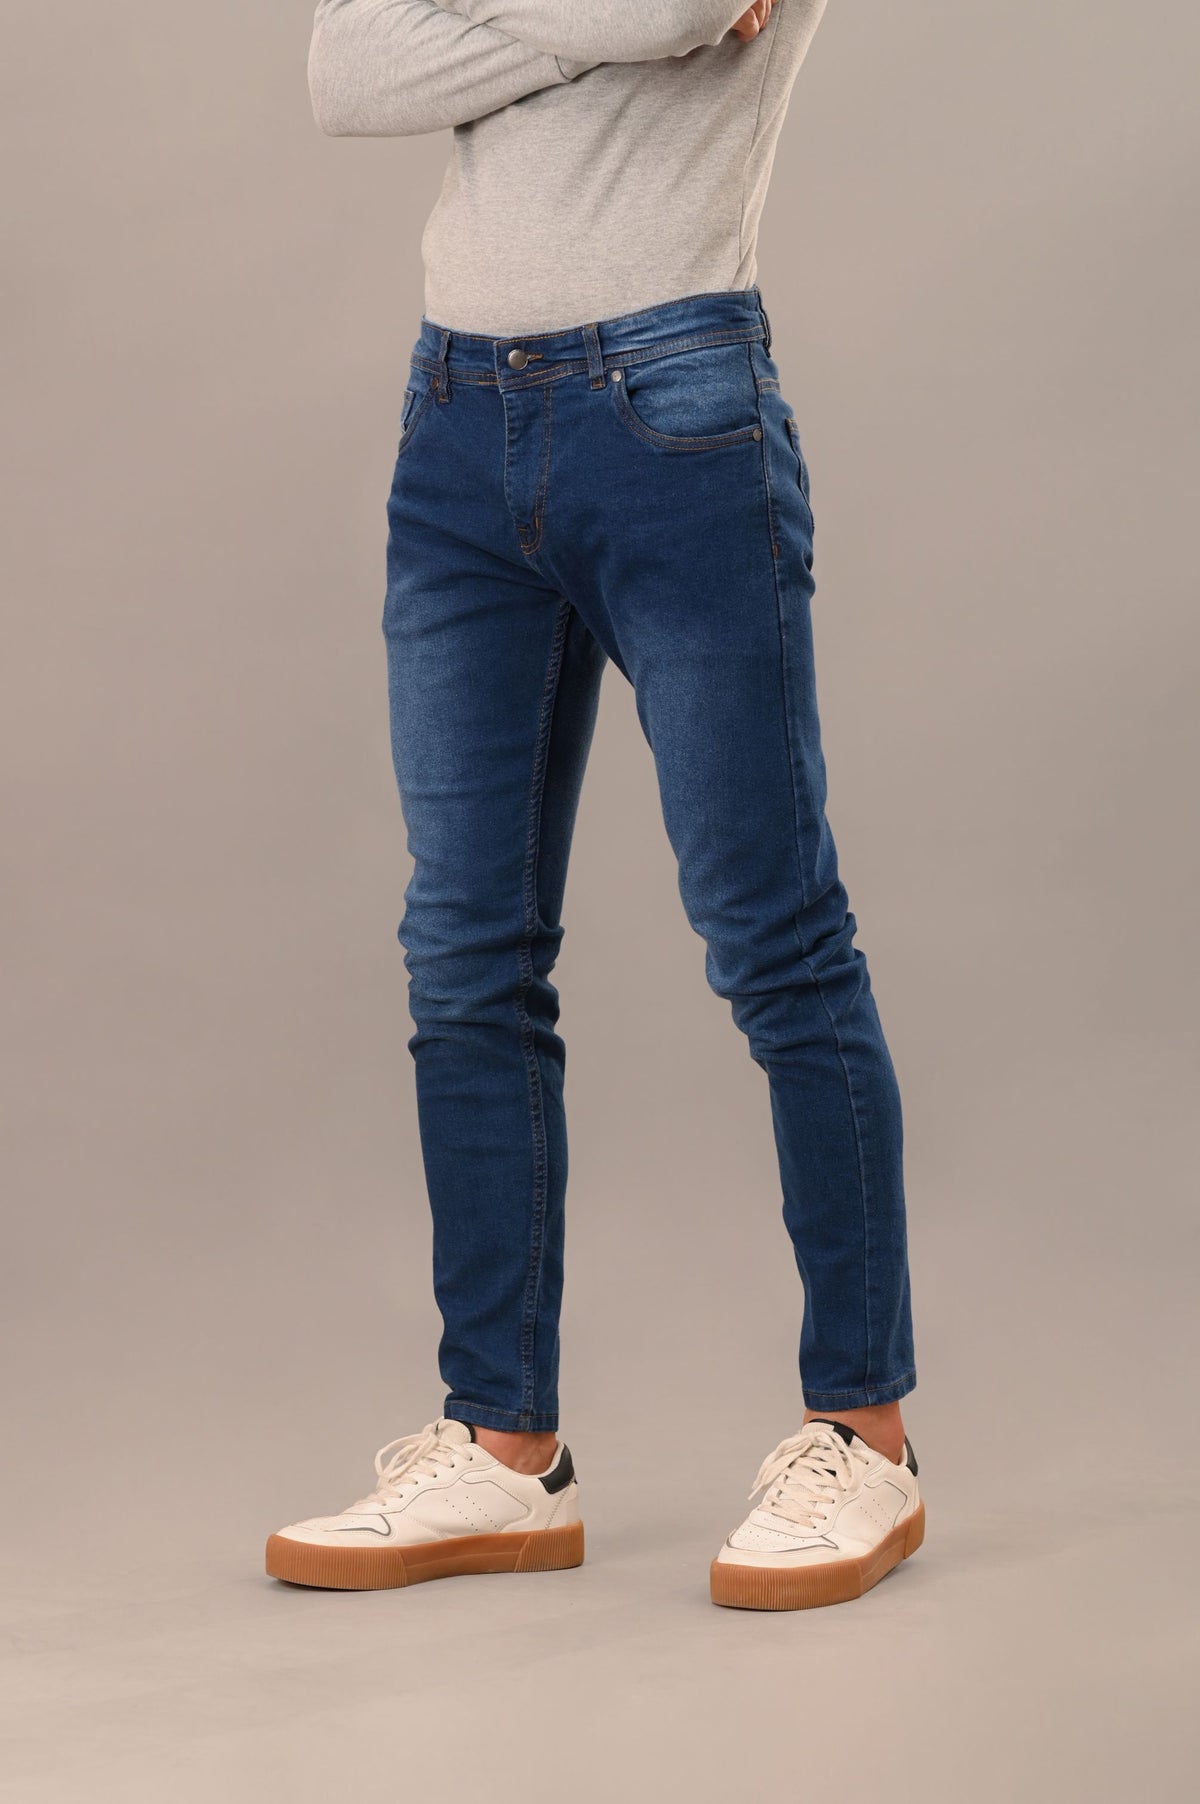 Indigo Blue Skinny Fit Jeans - Checkmate Atelier - Official Online Store